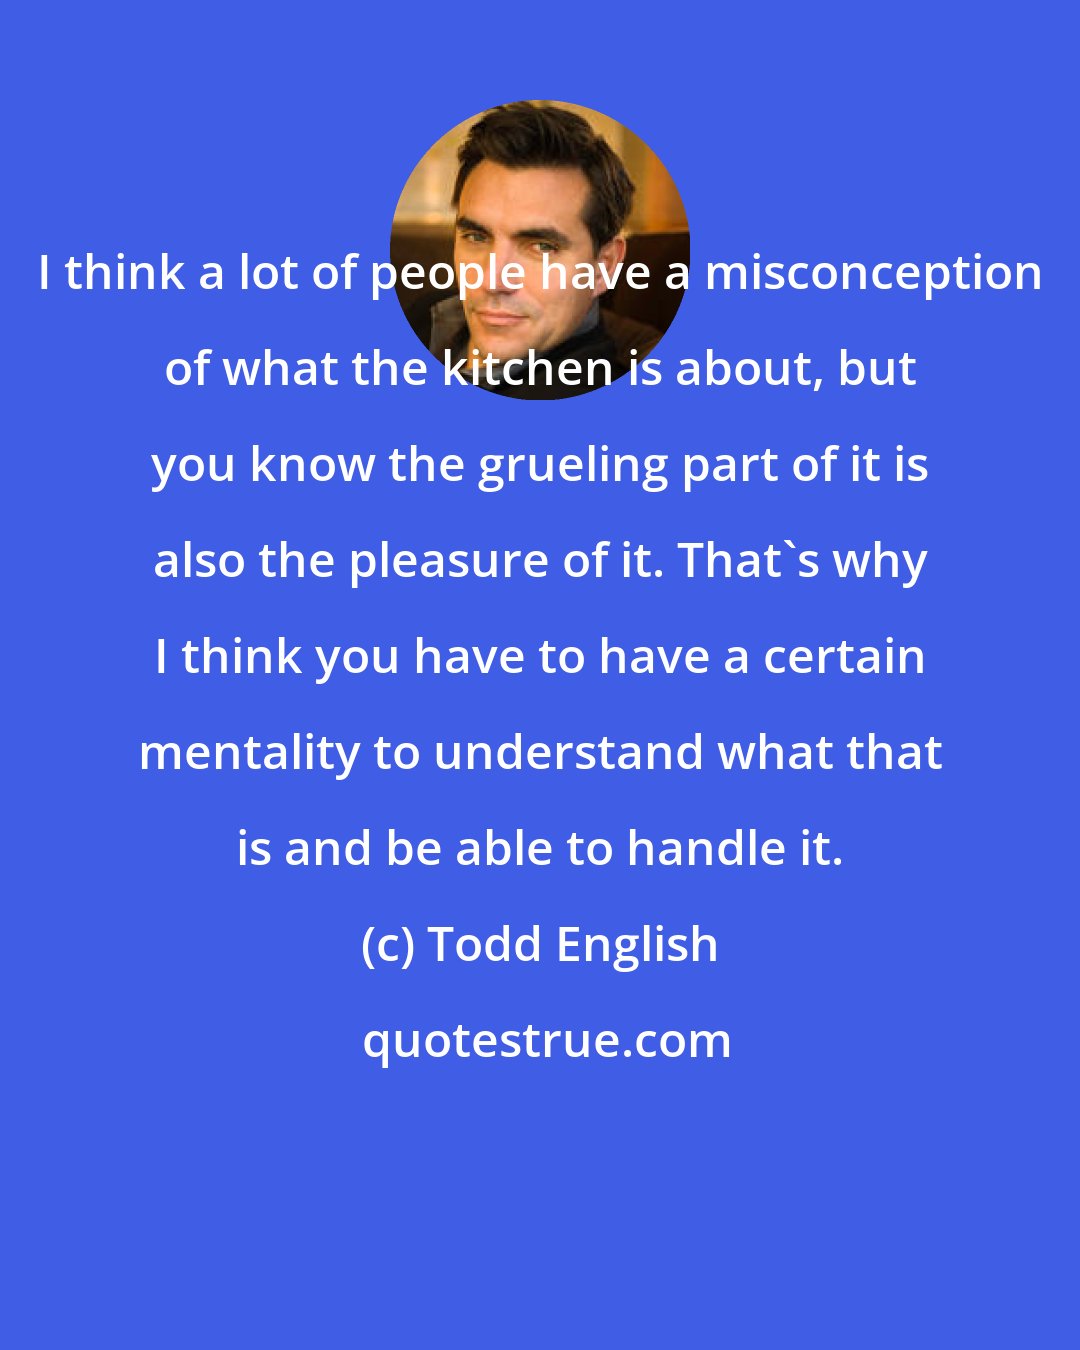 Todd English: I think a lot of people have a misconception of what the kitchen is about, but you know the grueling part of it is also the pleasure of it. That's why I think you have to have a certain mentality to understand what that is and be able to handle it.